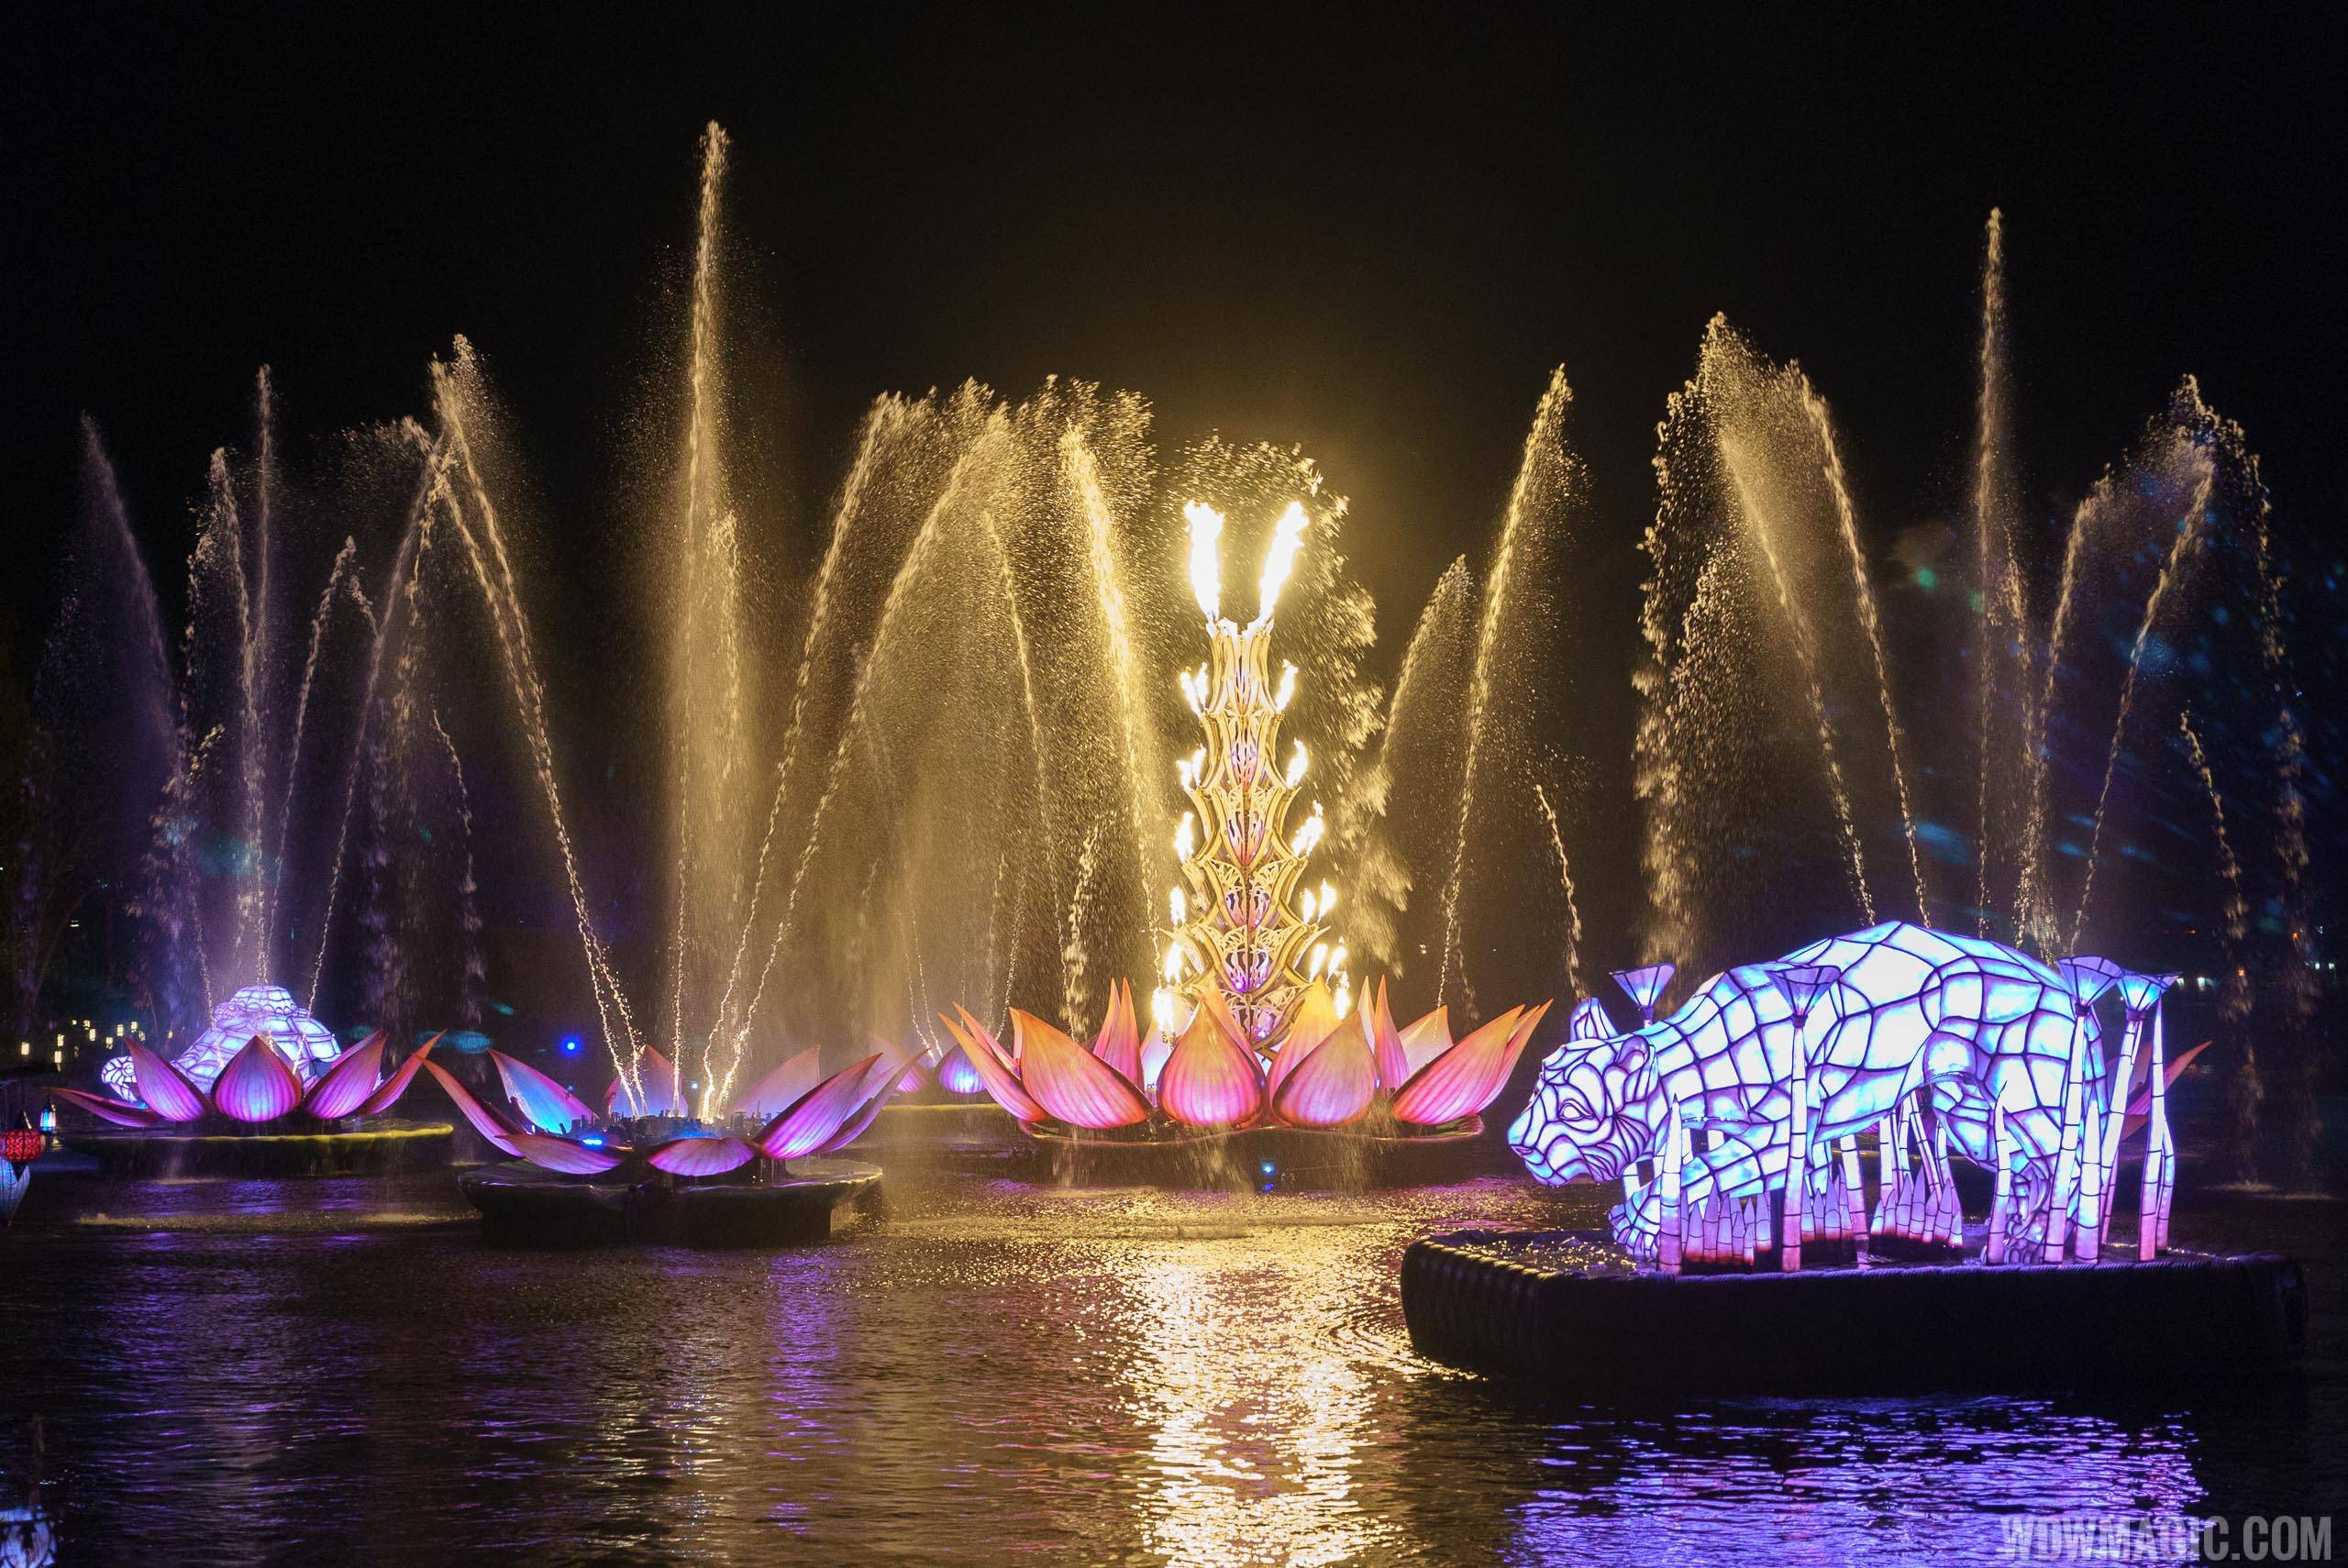 Disney now lists Rivers of Light as coming in 2017